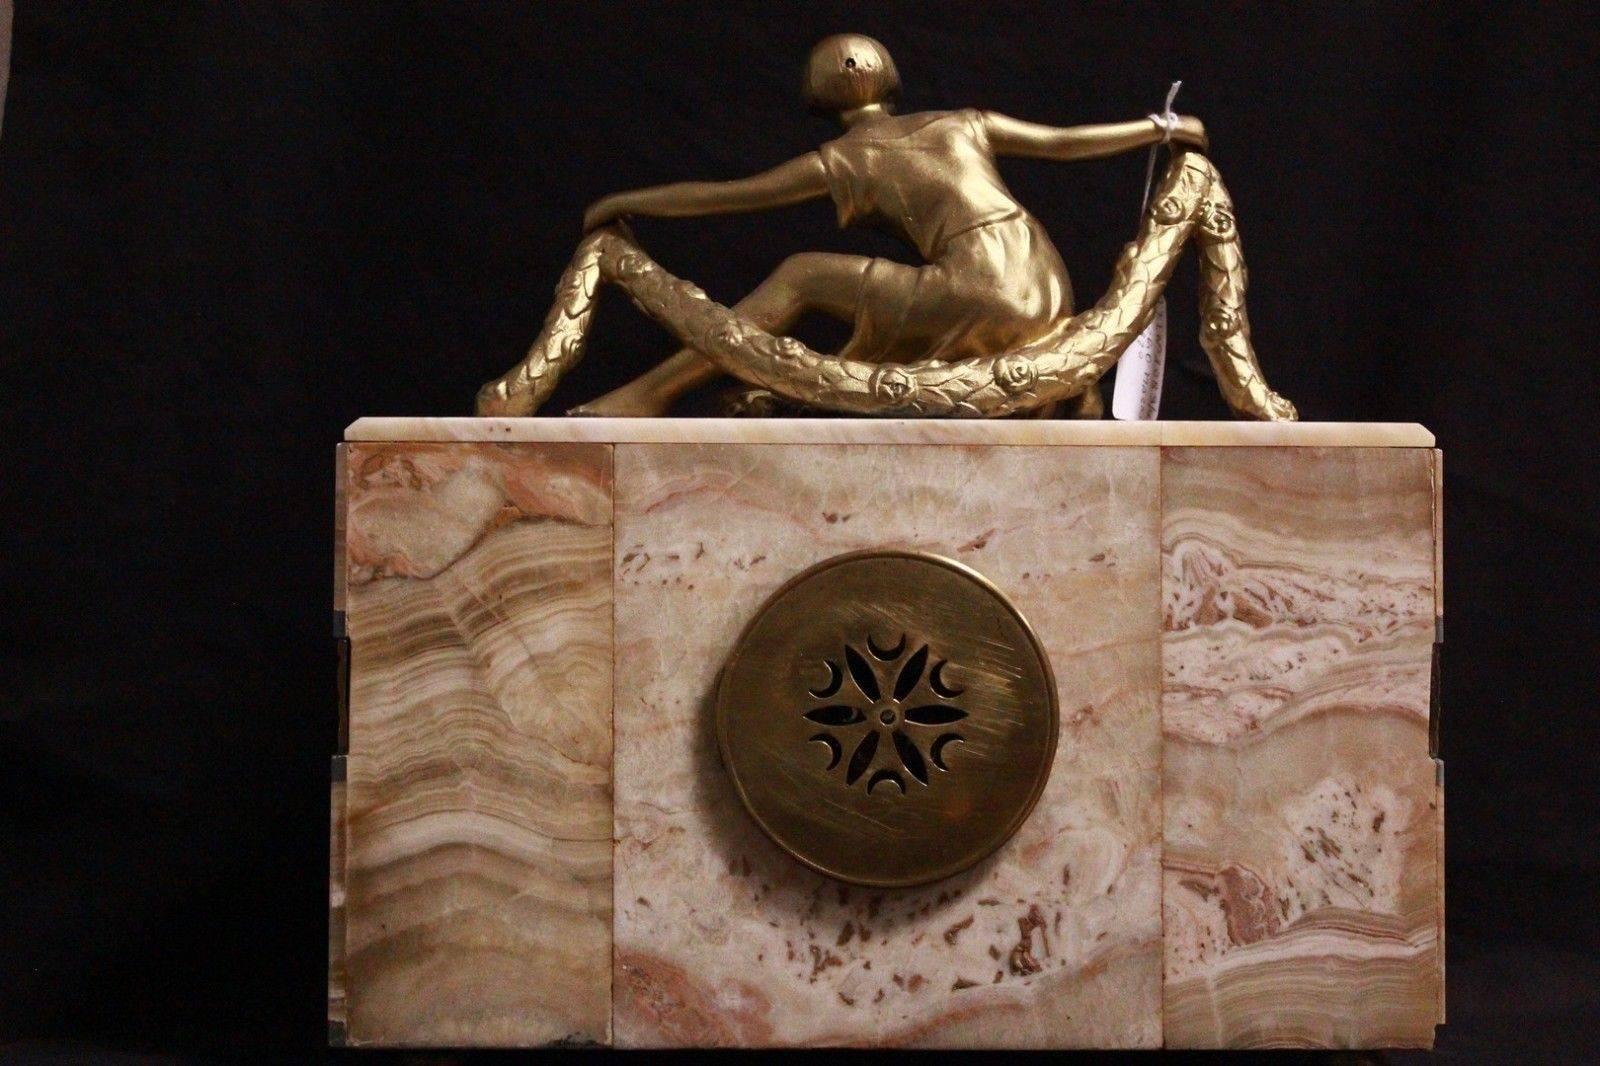 Important marble Art Deco mantel clock from the early 1900.
Measurements: Width 34 cm, depth 11 cm, height 37 cm.

A French Empire-style mantel clock is a type of elaborately decorated mantel clock made in France during the Napoleonic Empire